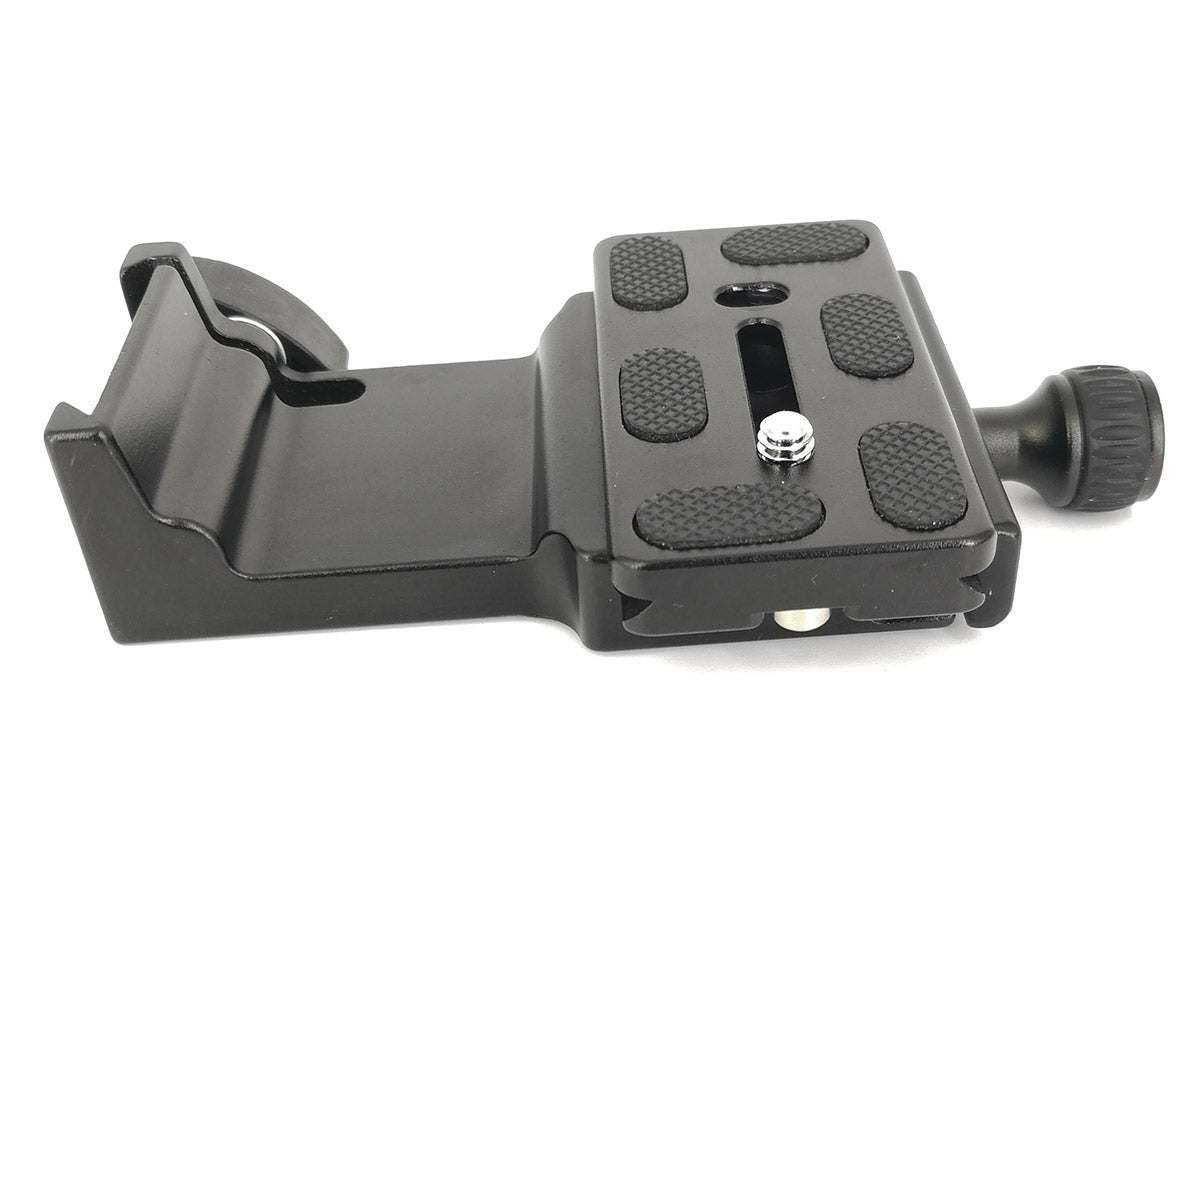 Koolehaoda Quick Release Plate Clamp for KQ-45 Gimbal Head